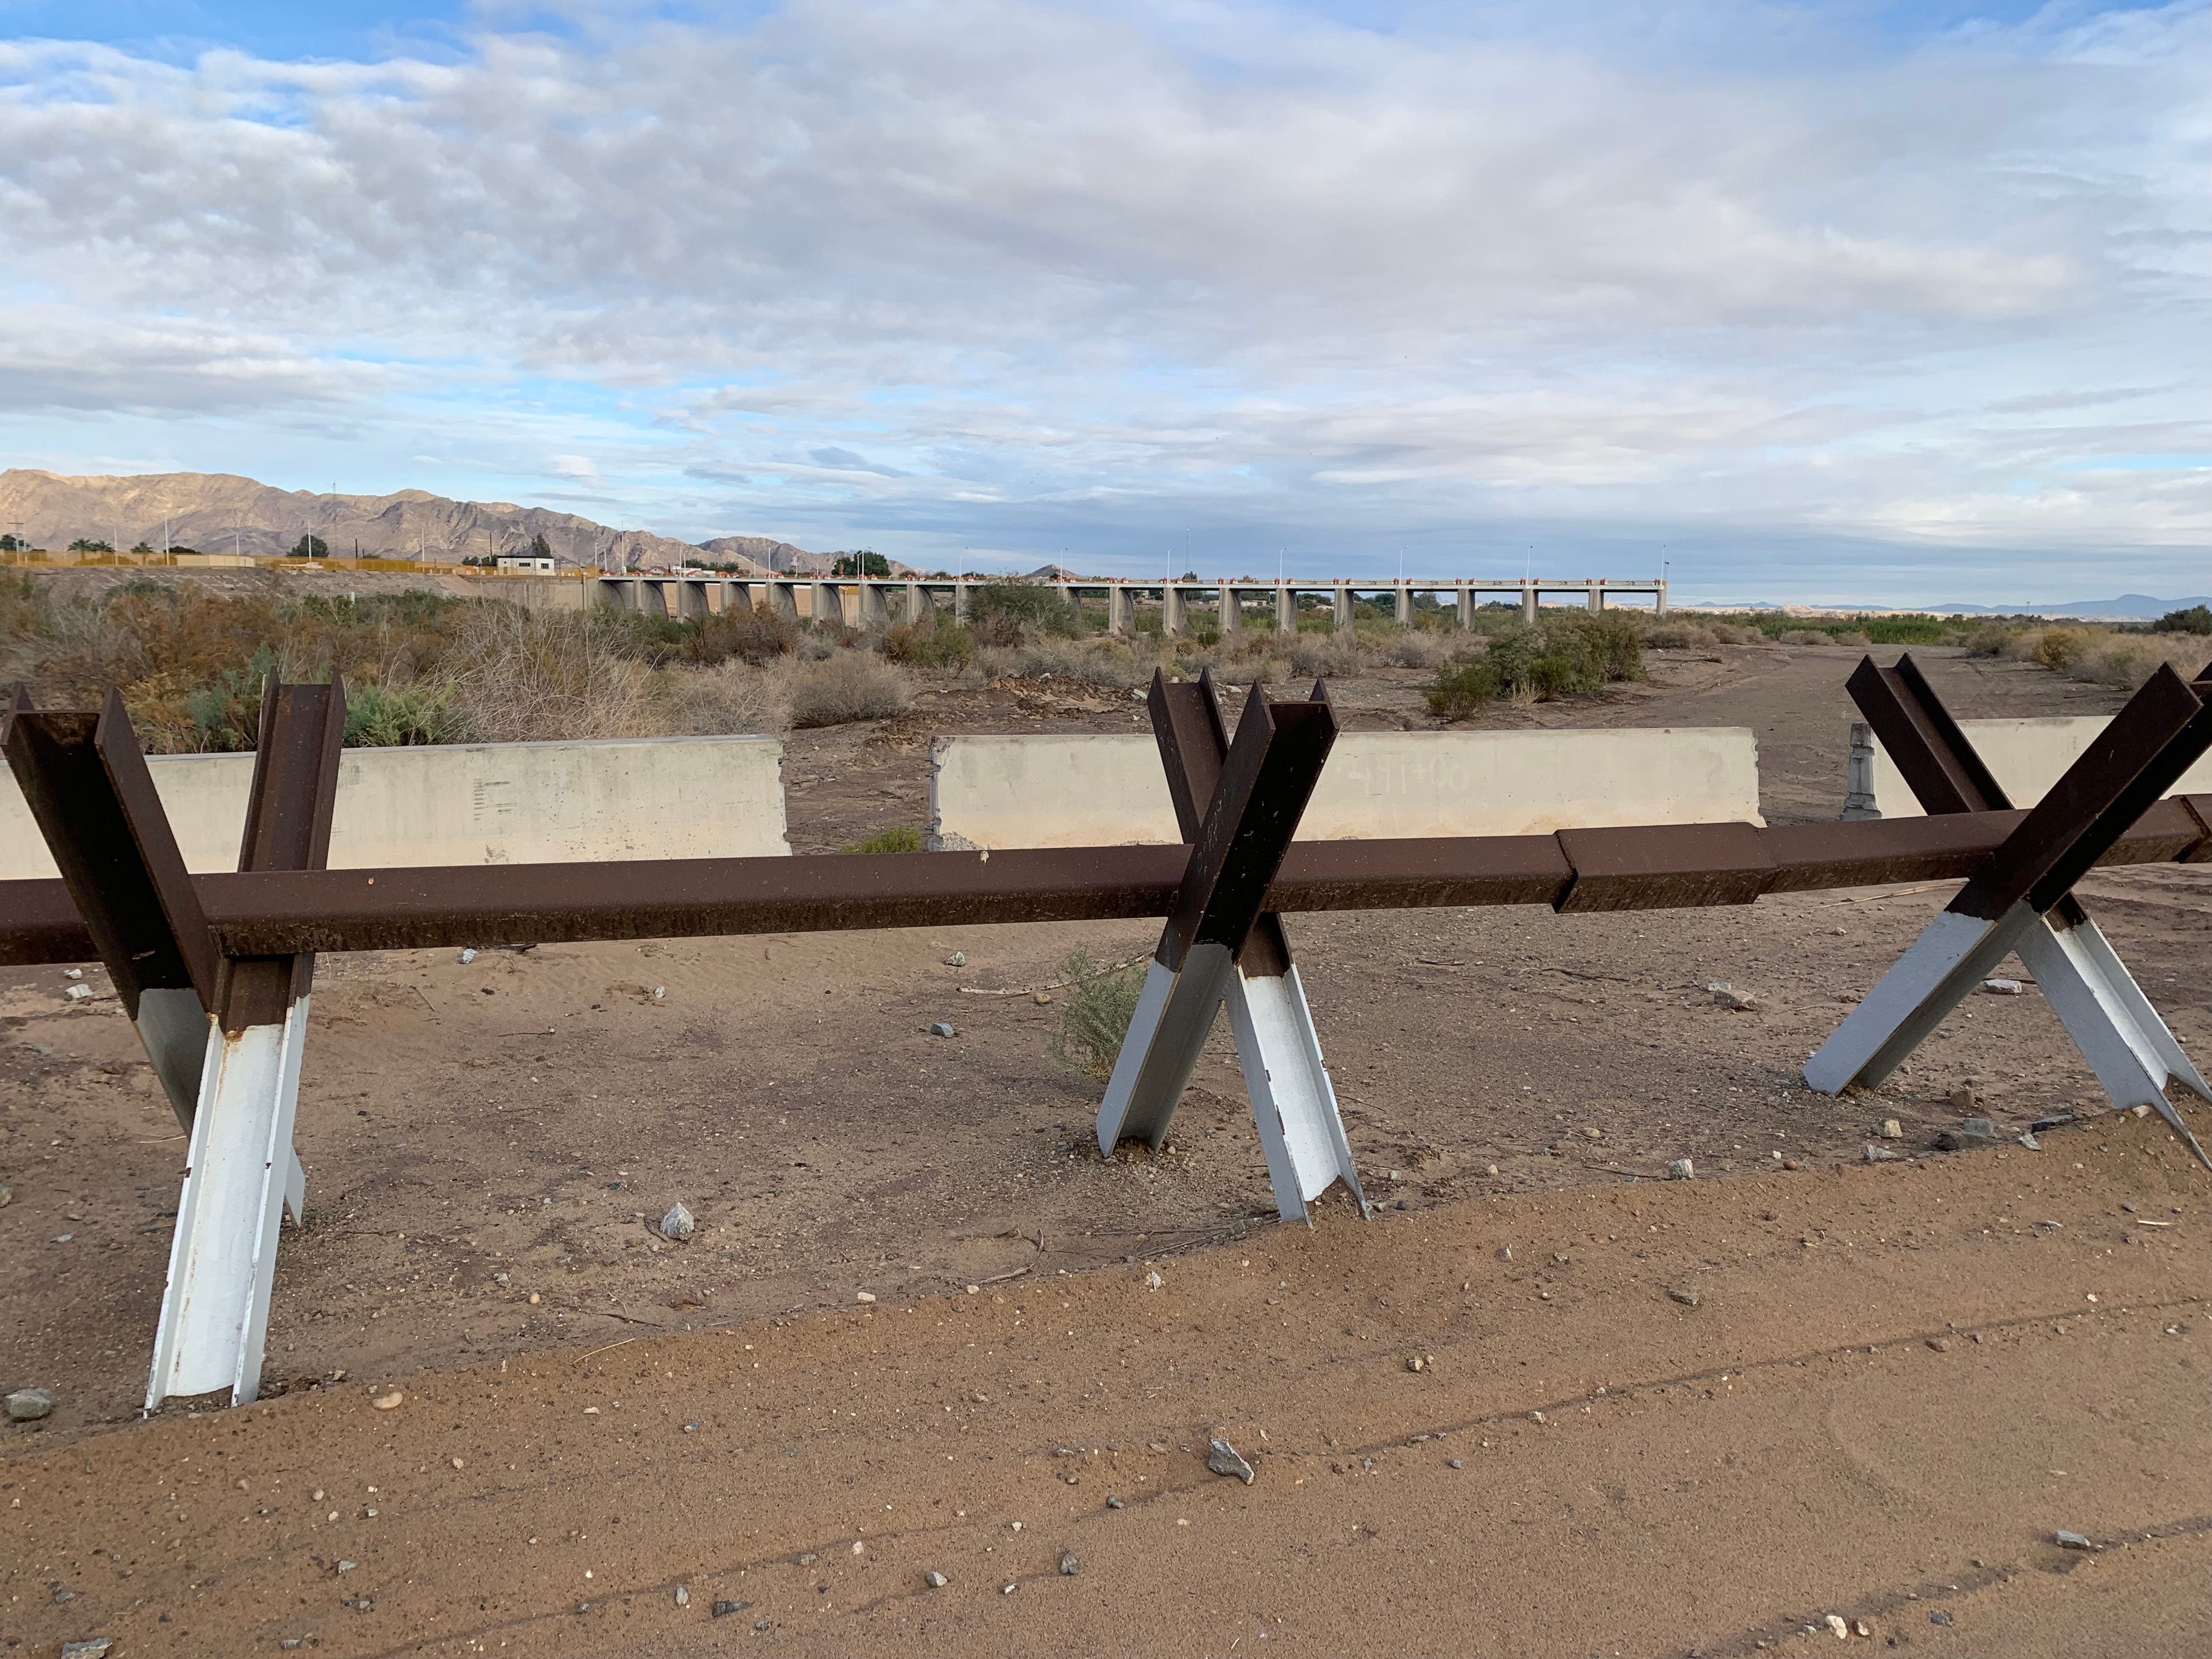 Migrants skirt border fortifications, cross largely unimpeded at the Colorado River